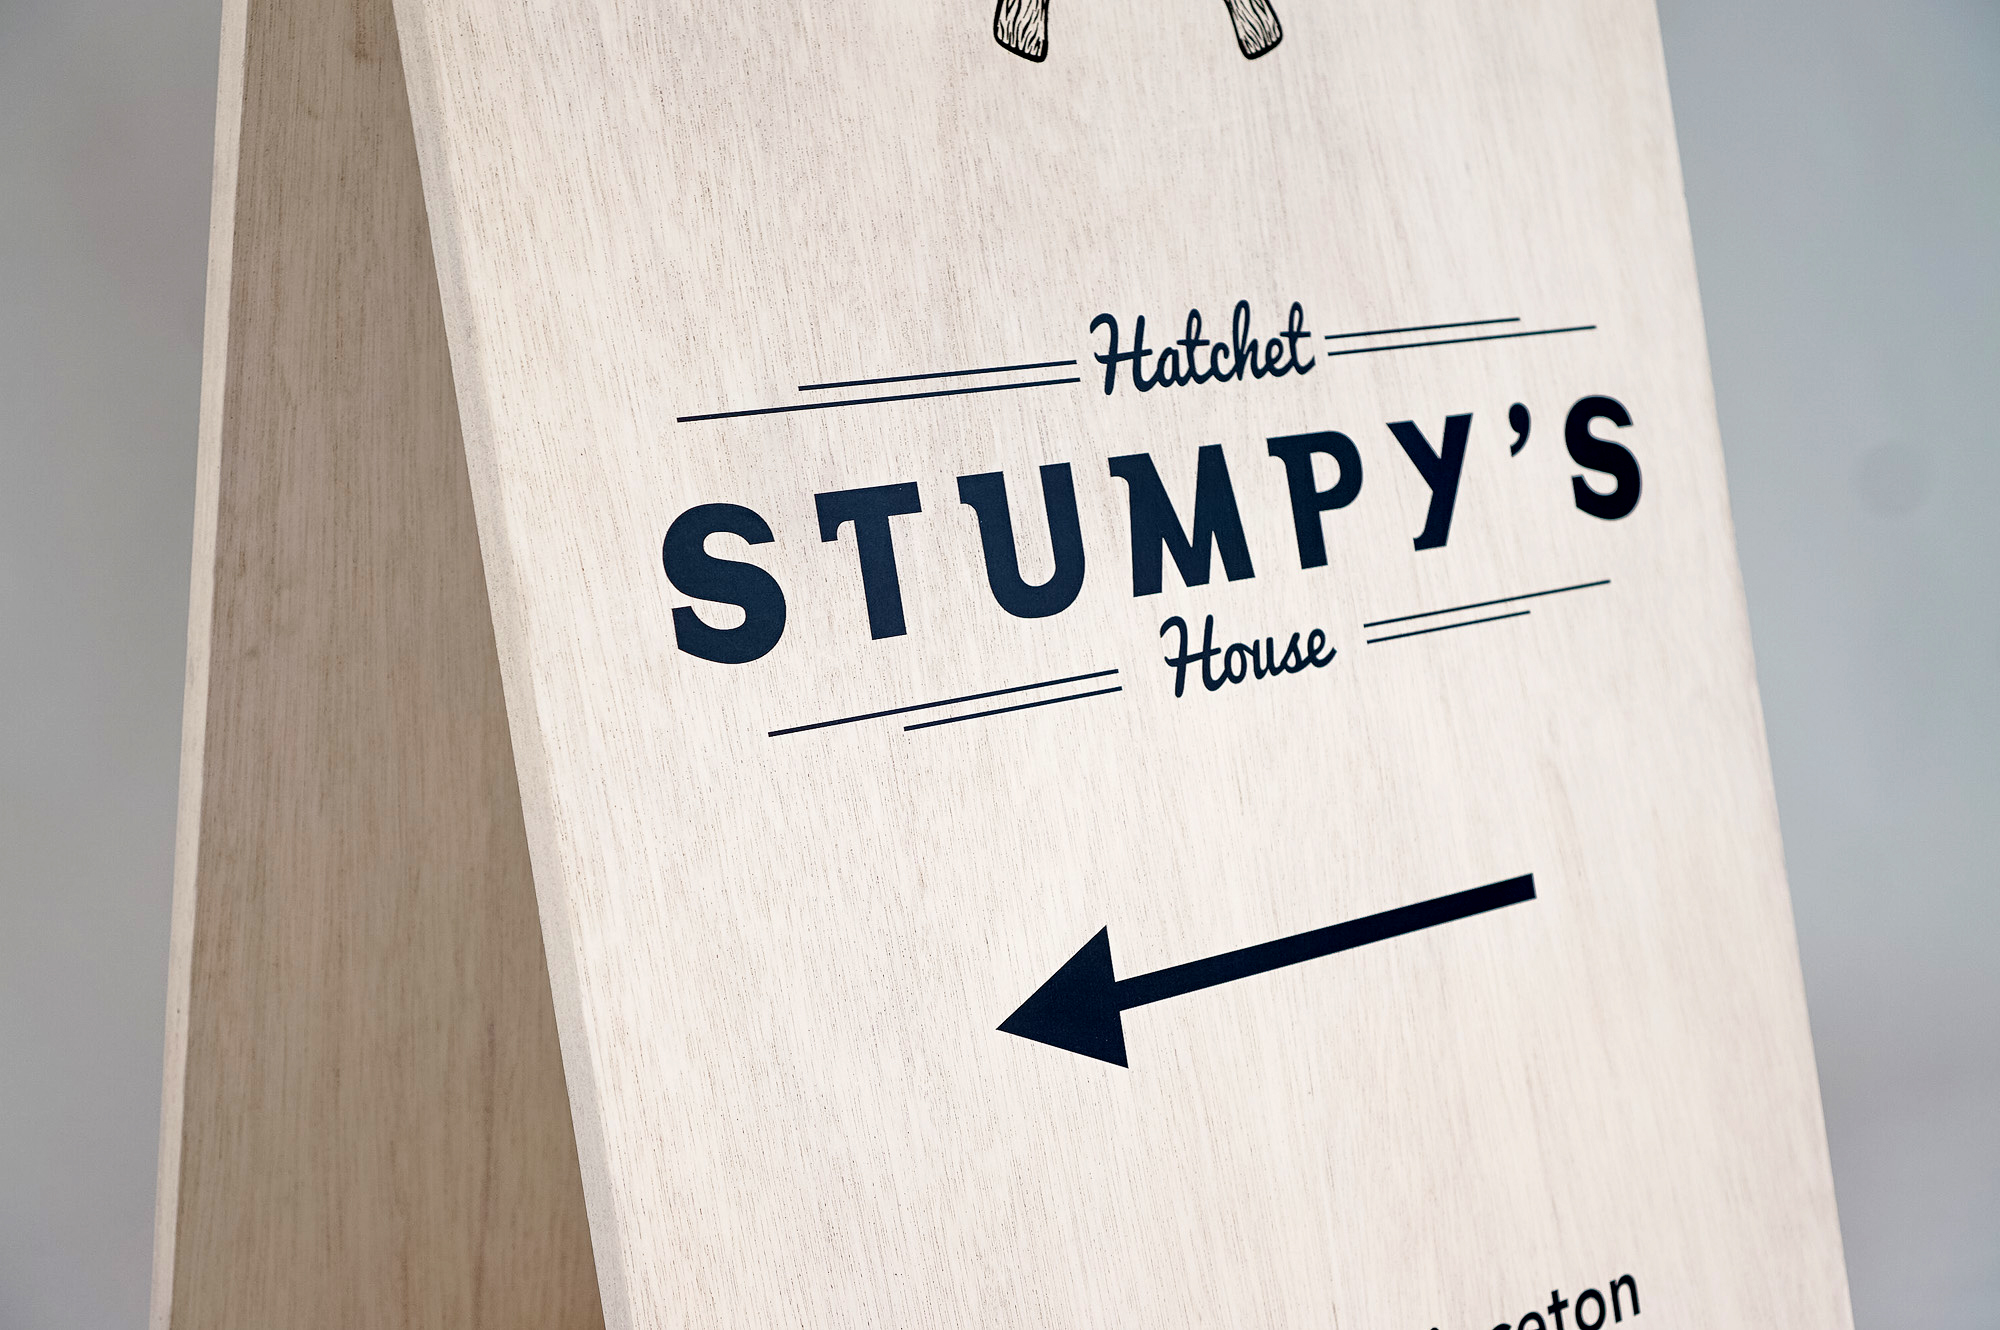 Stumpy's, the first hatchet throwing venue in the U.S.